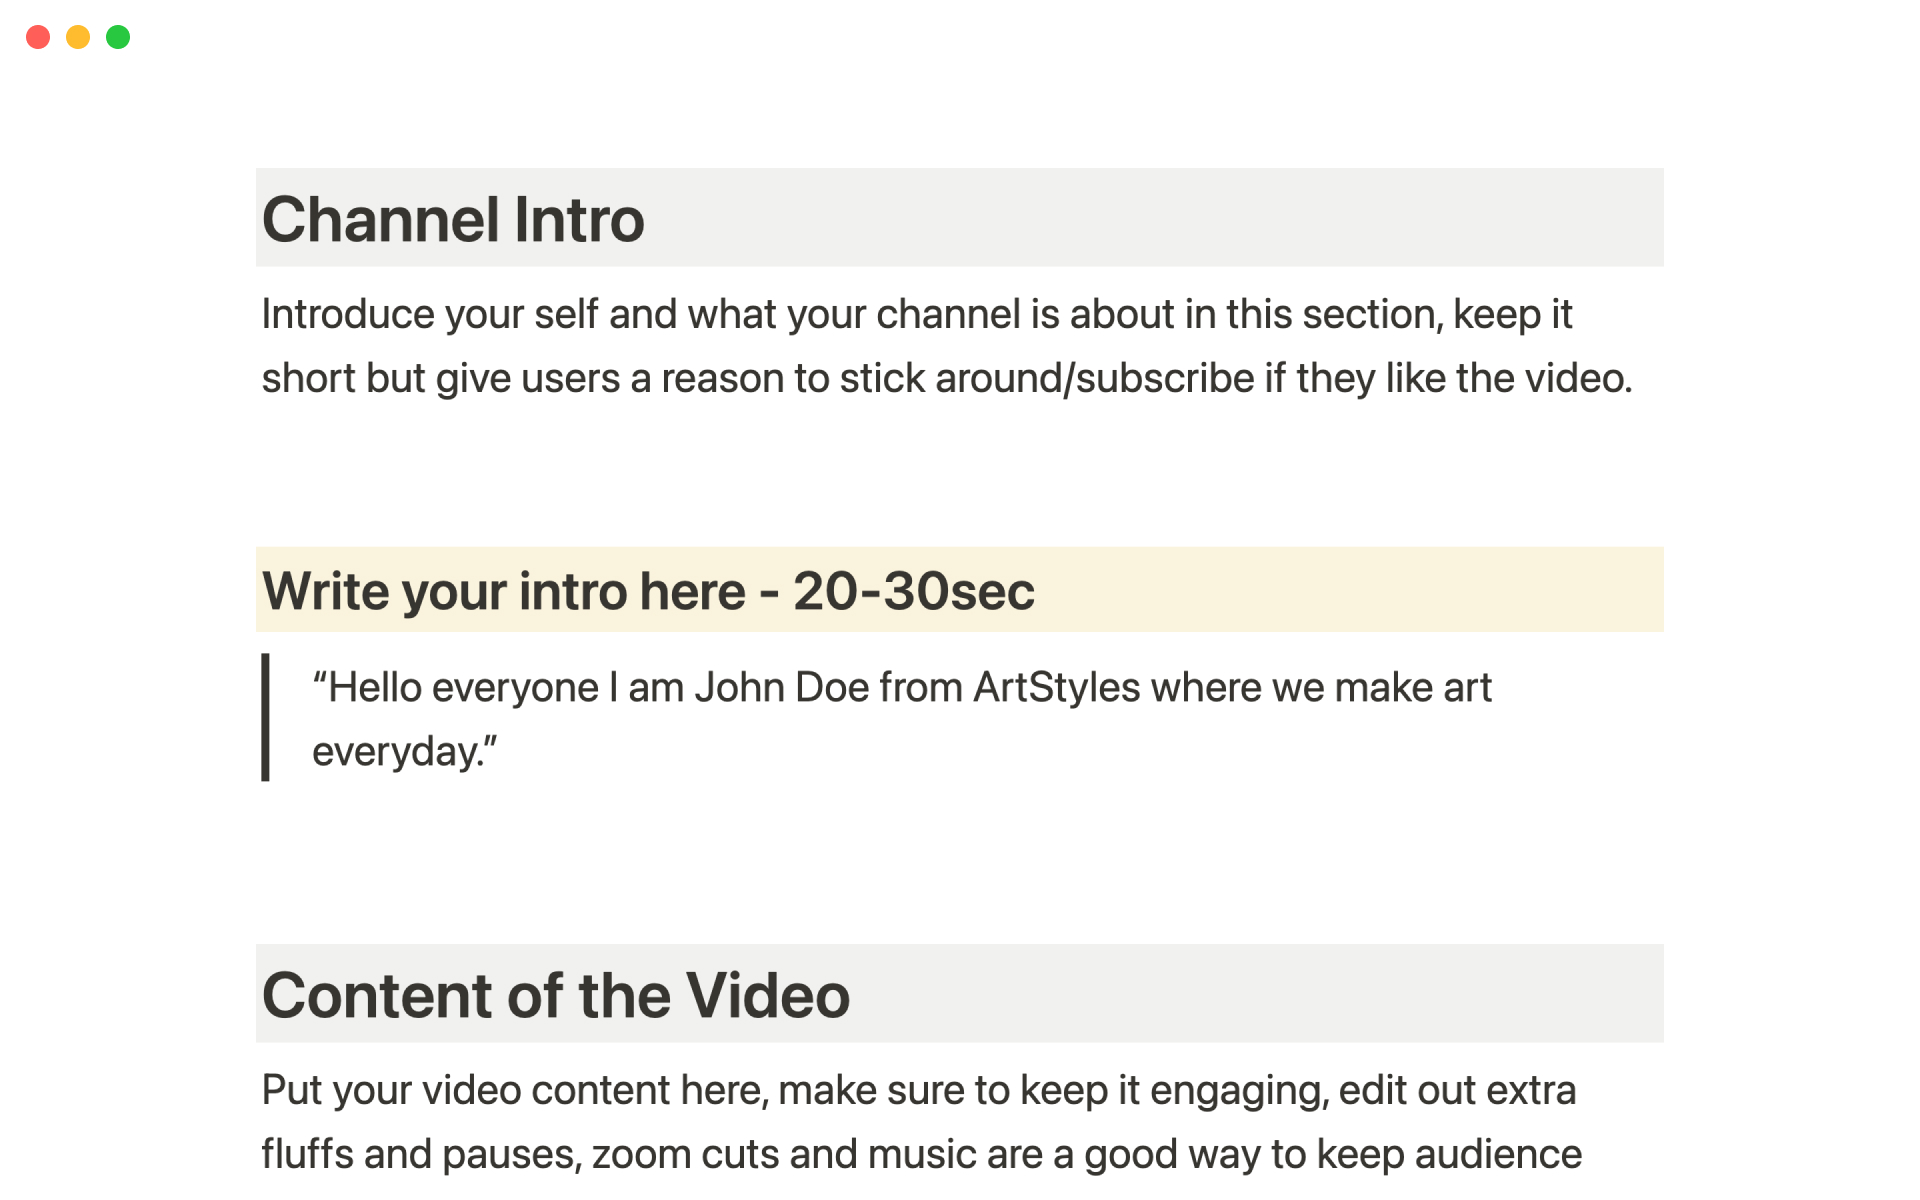 Helps creators plan their content for YouTube, Twitter, and Instagram.